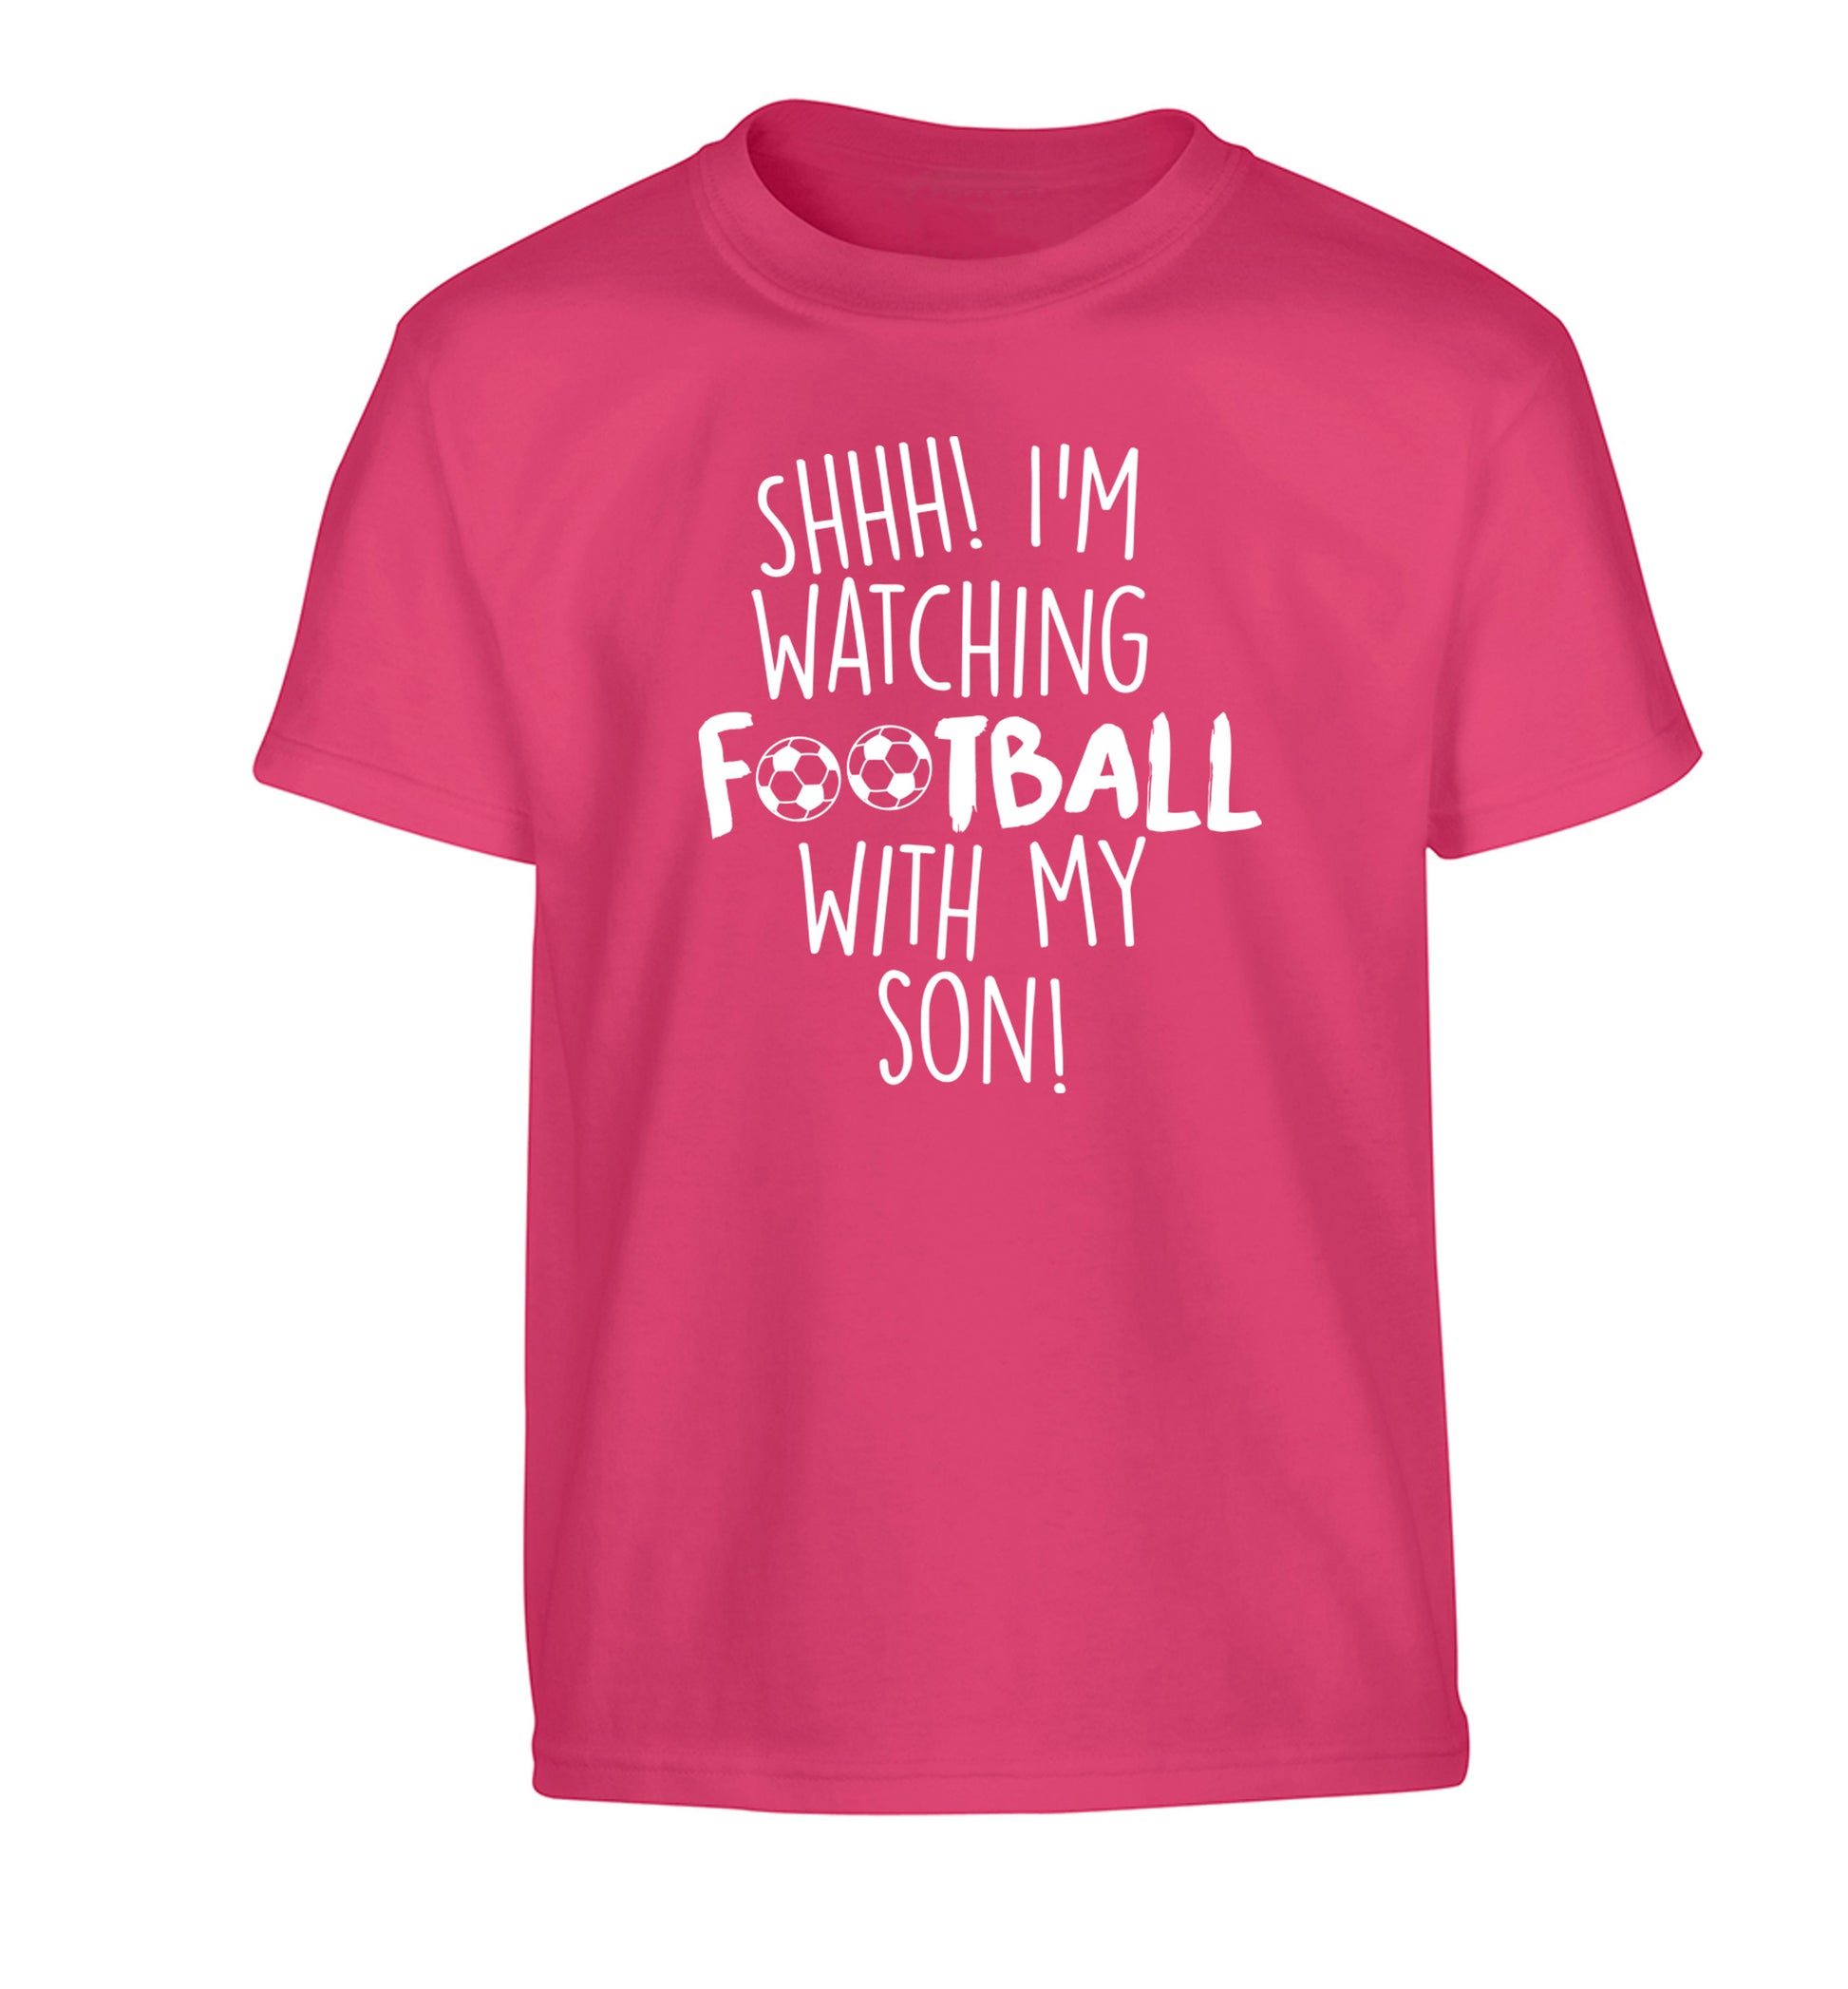 Shhh I'm watching football with my son Children's pink Tshirt 12-14 Years